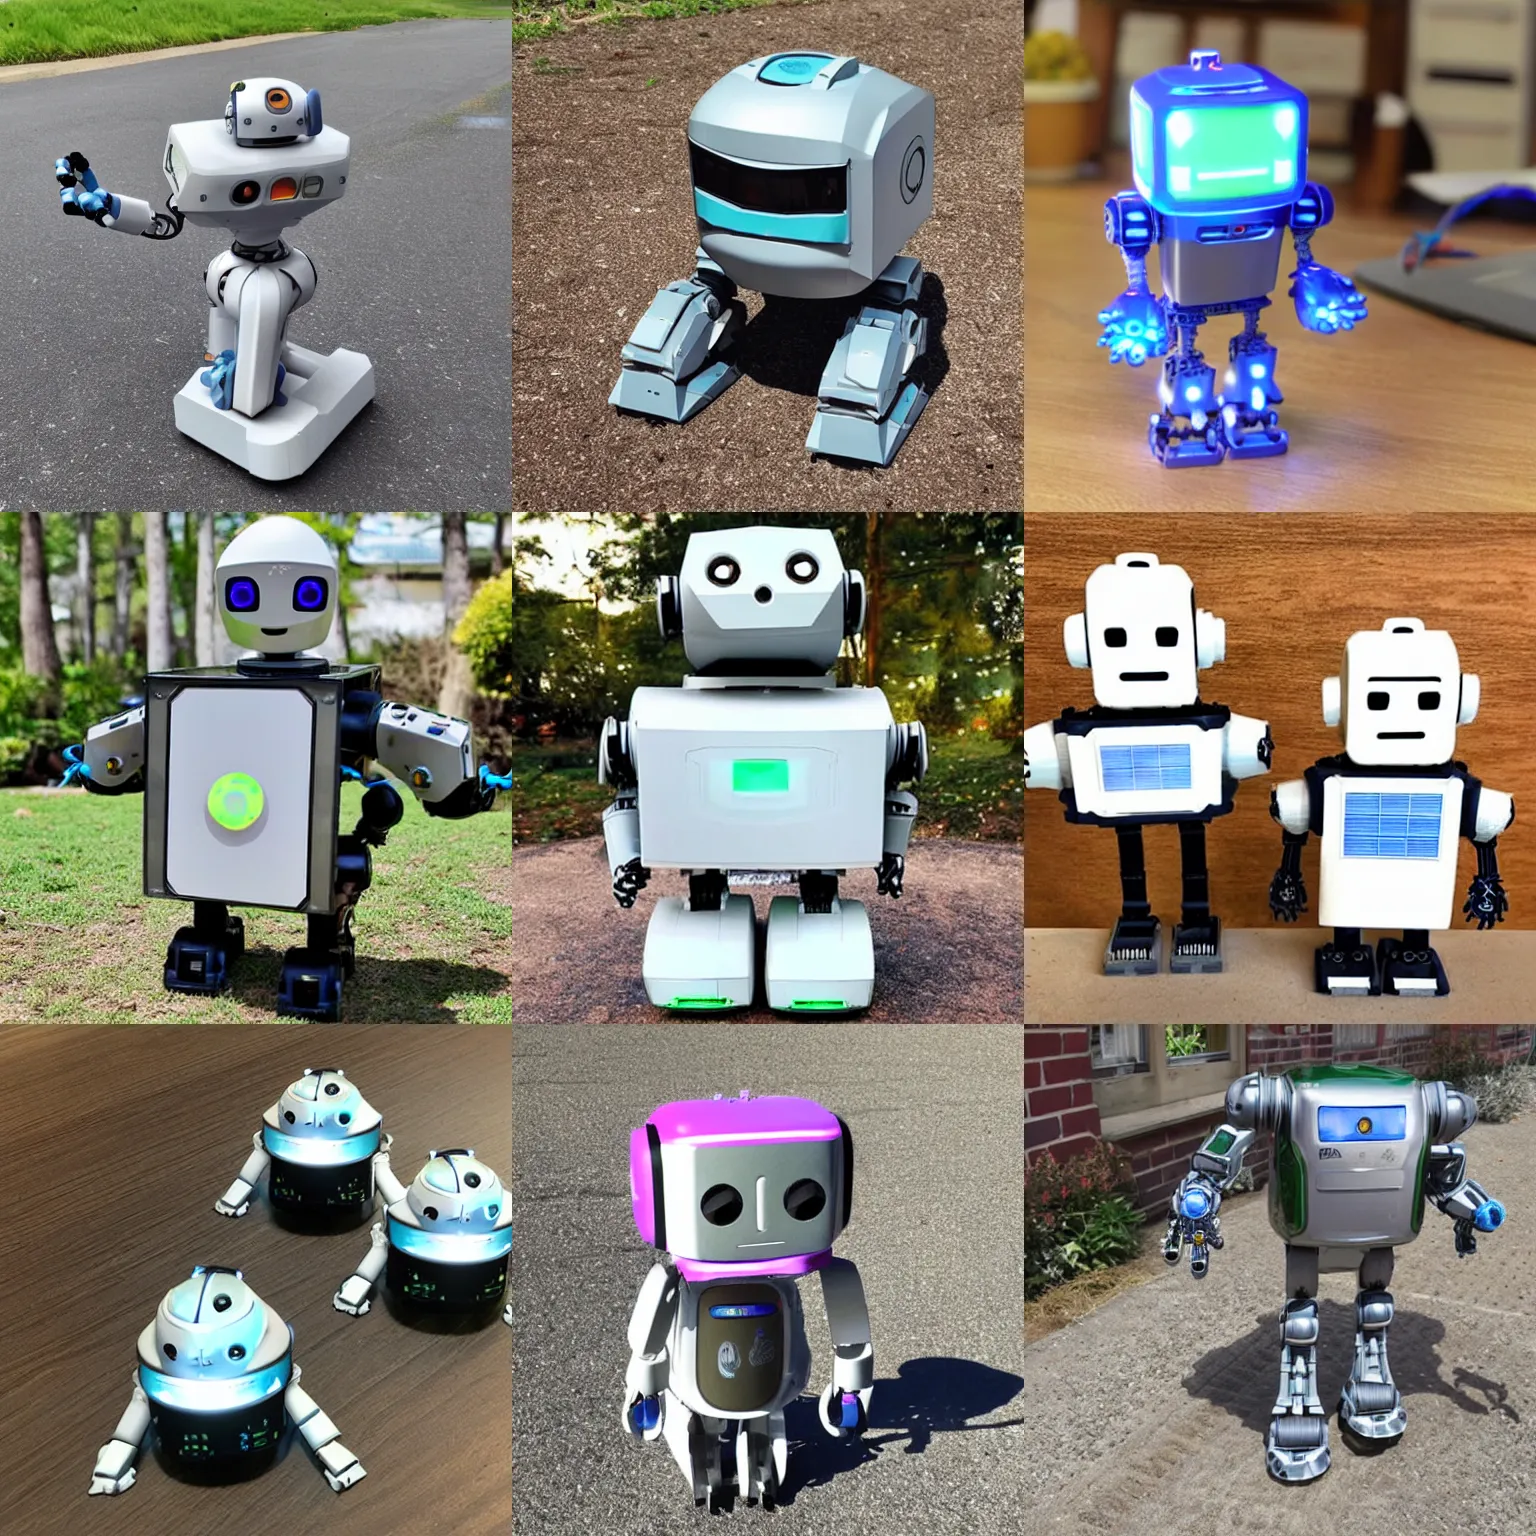 Prompt: <robot source='3d printed' power='solar' design='cute adorable' alignment='chaotic good'>Robot gains sentience</robot>